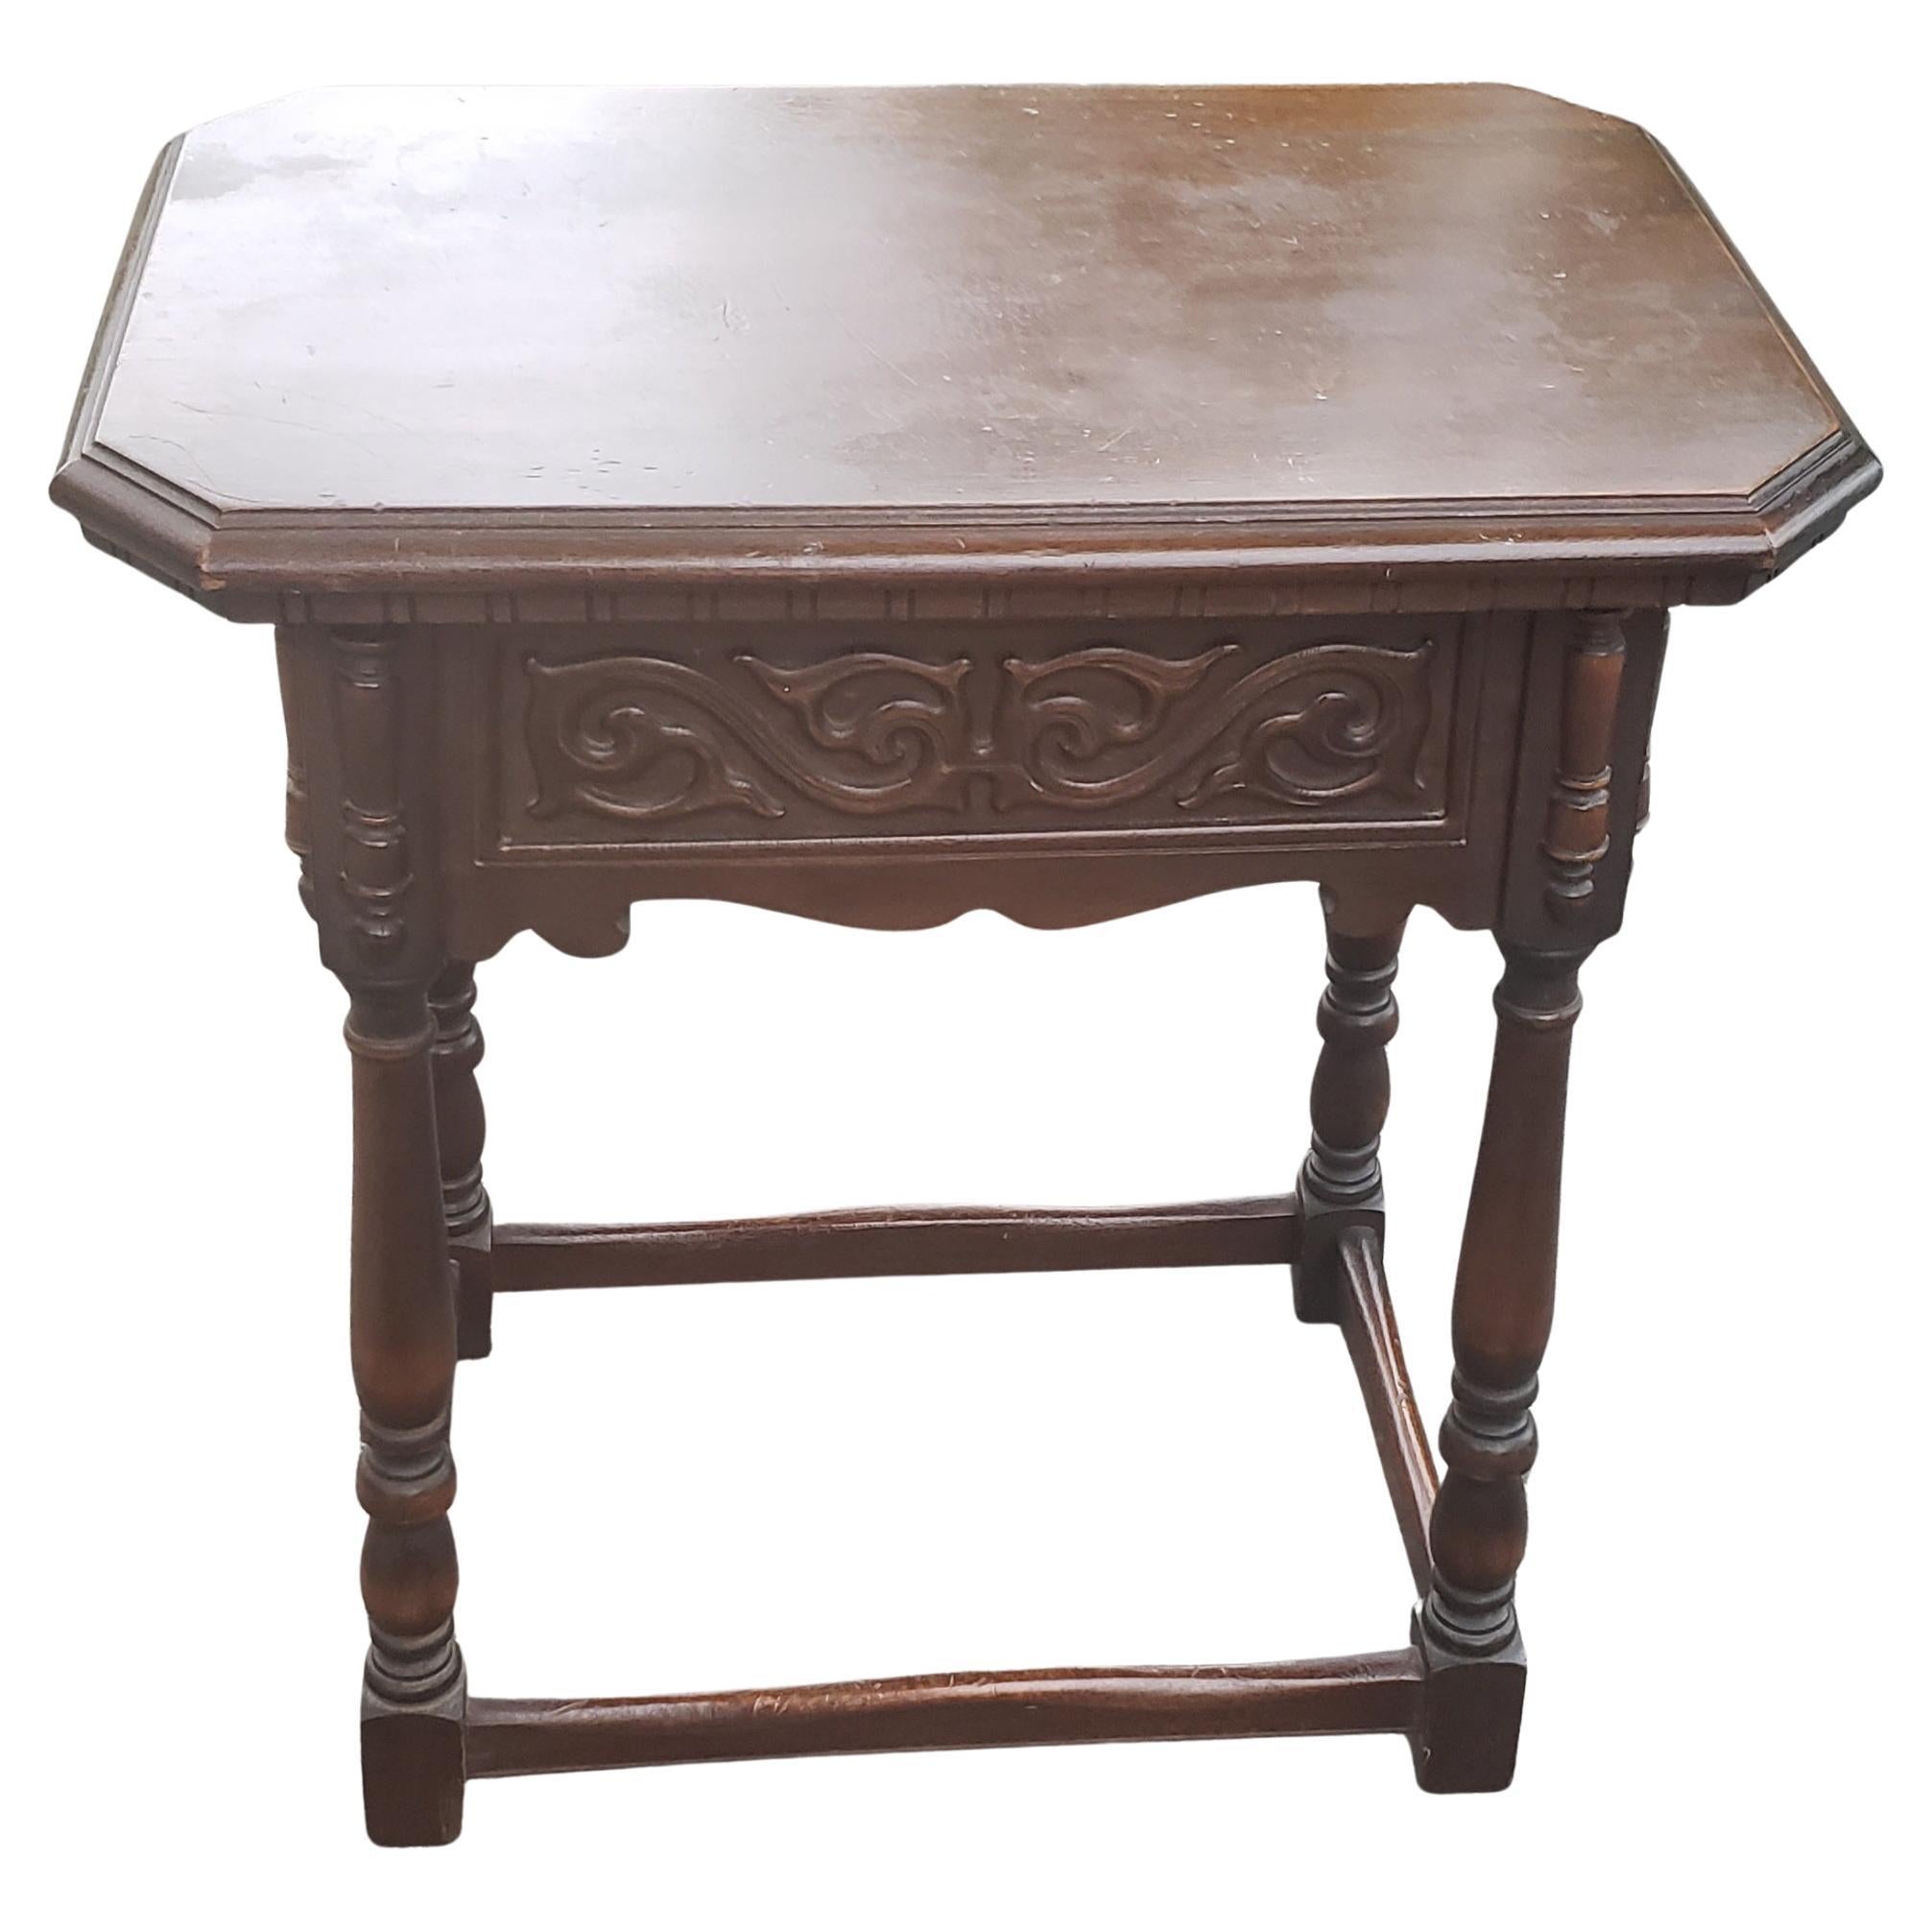 20th Century Antique Edwardian Carved Walnut Side Table, Circa 1920s For Sale